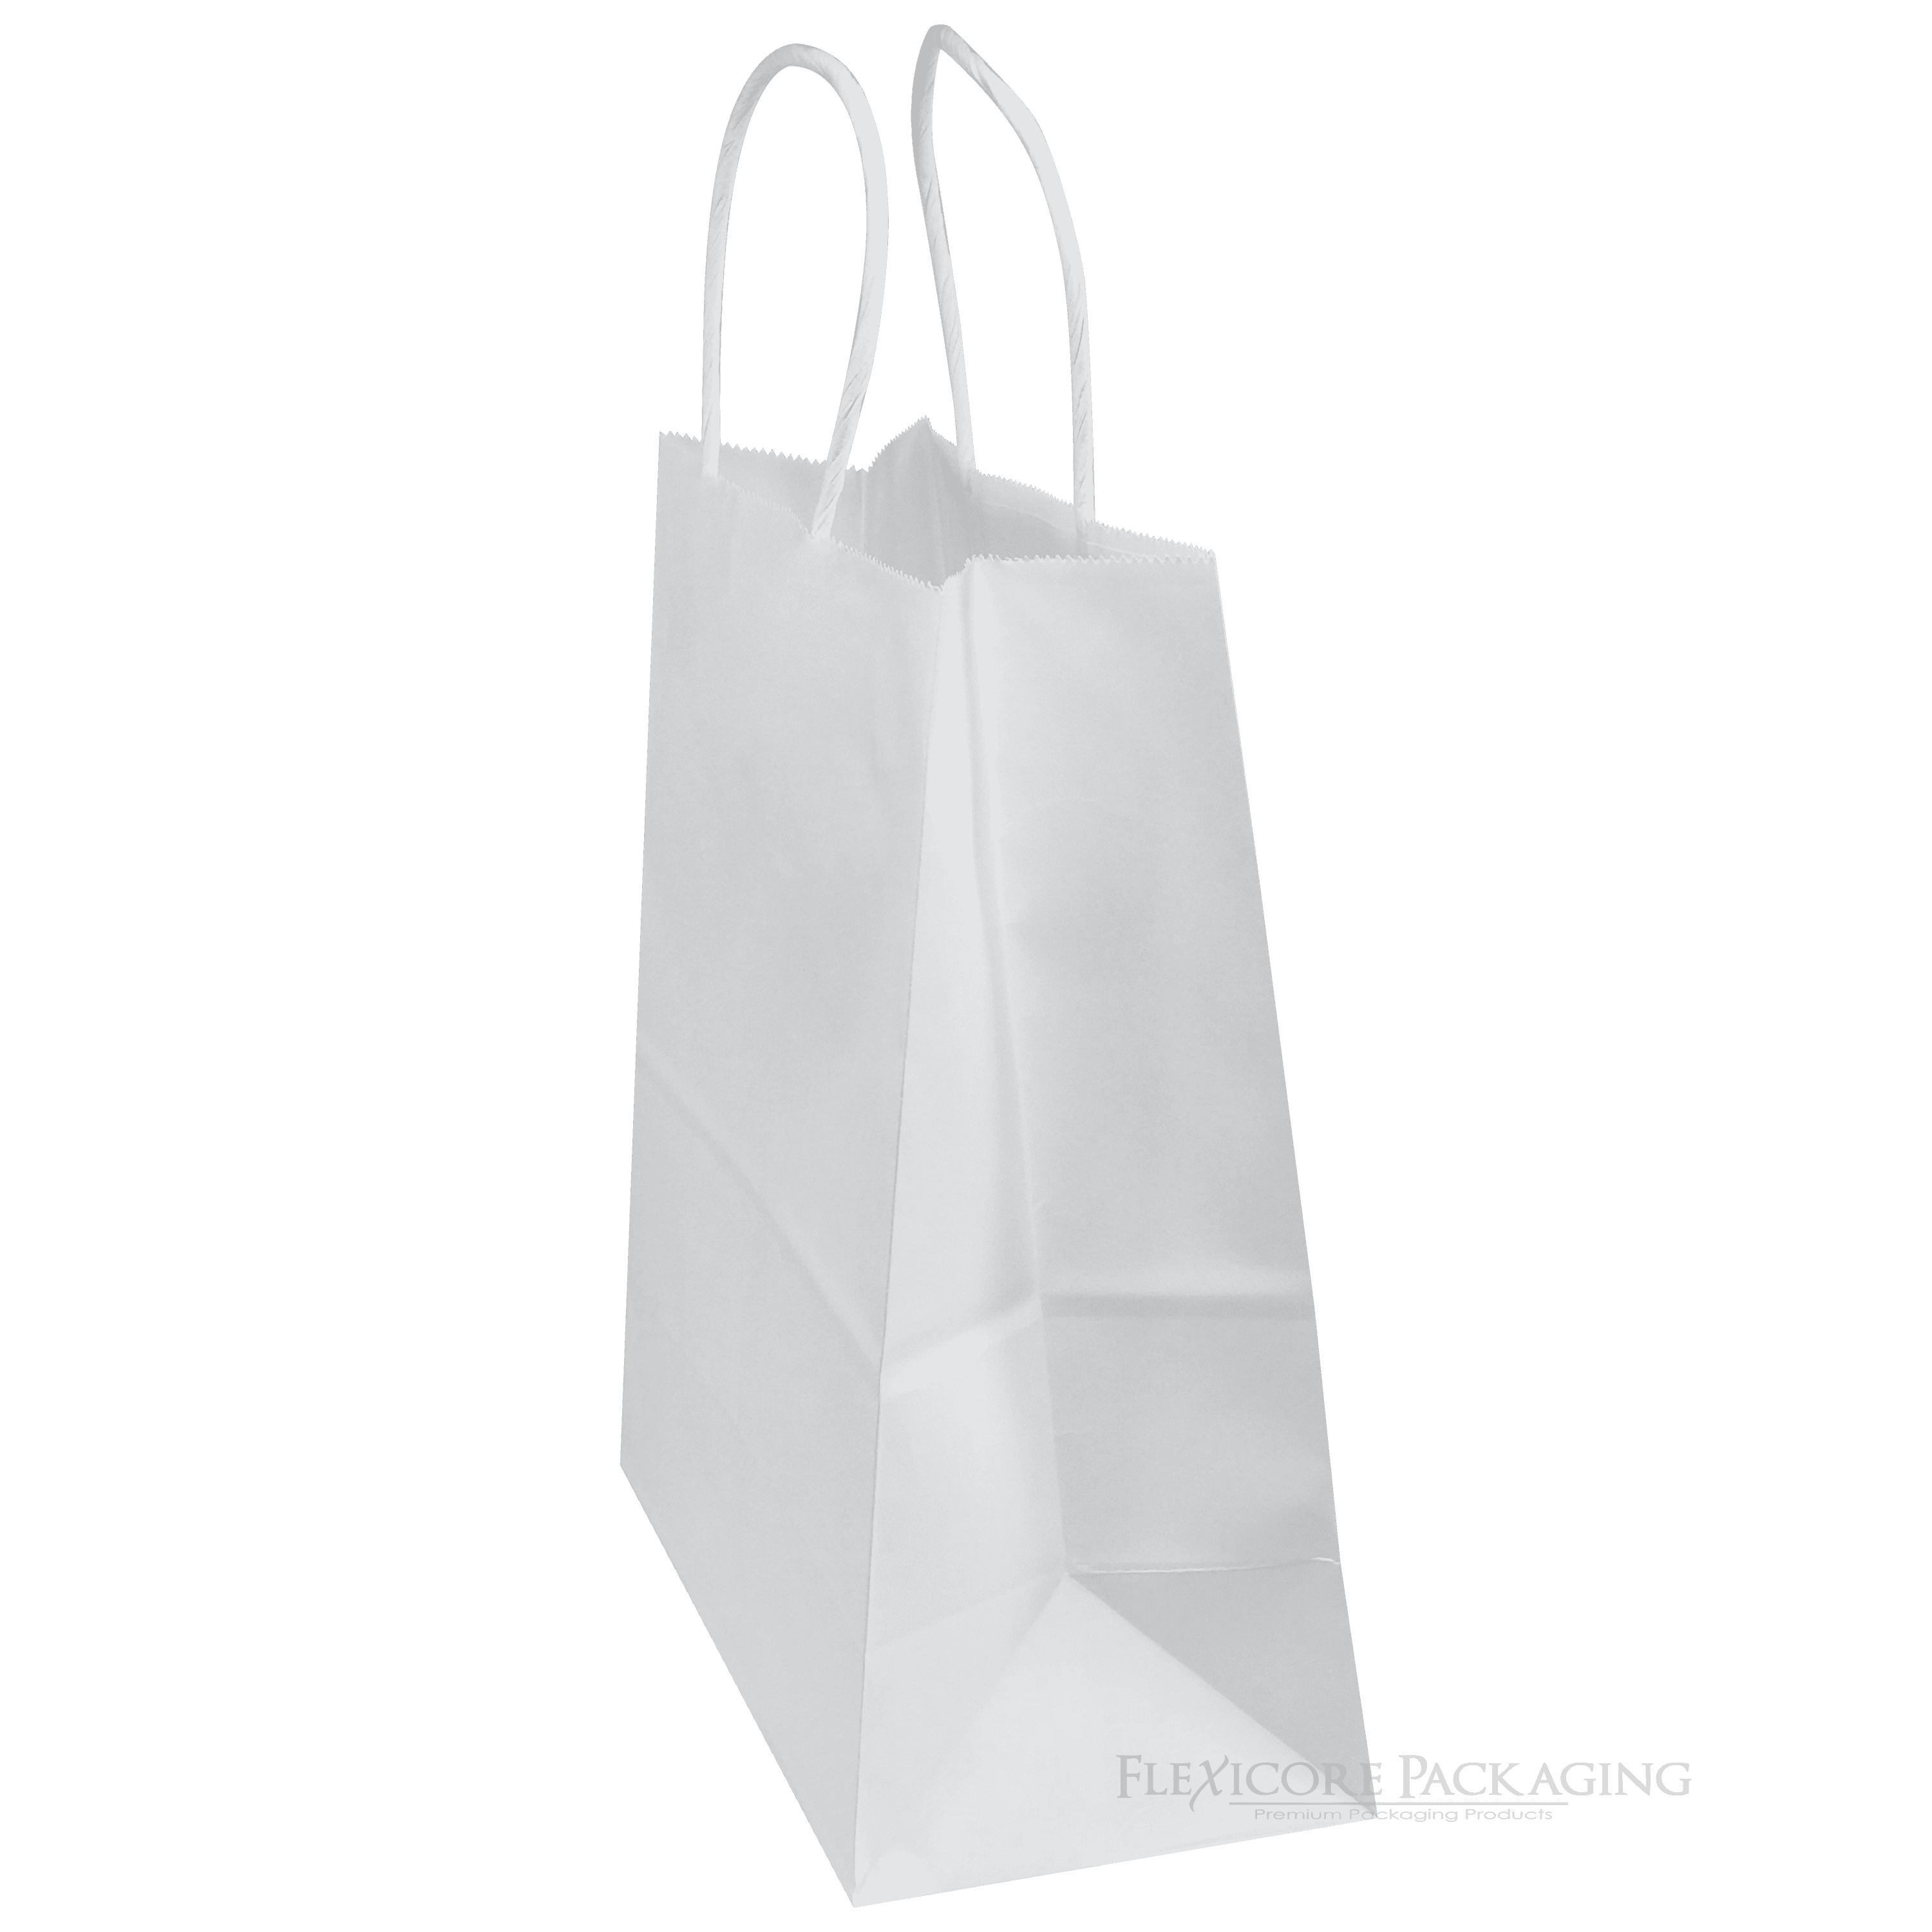 Paper Bags Present 120 GSM 1 kg Kraft Paper Shopping Bags, Cake Paper Bags, Paper  Bags with Handles, Gift Bags, 12 x 12 x 12 inches (Brown) Pack of 10 :  Amazon.in: Home & Kitchen